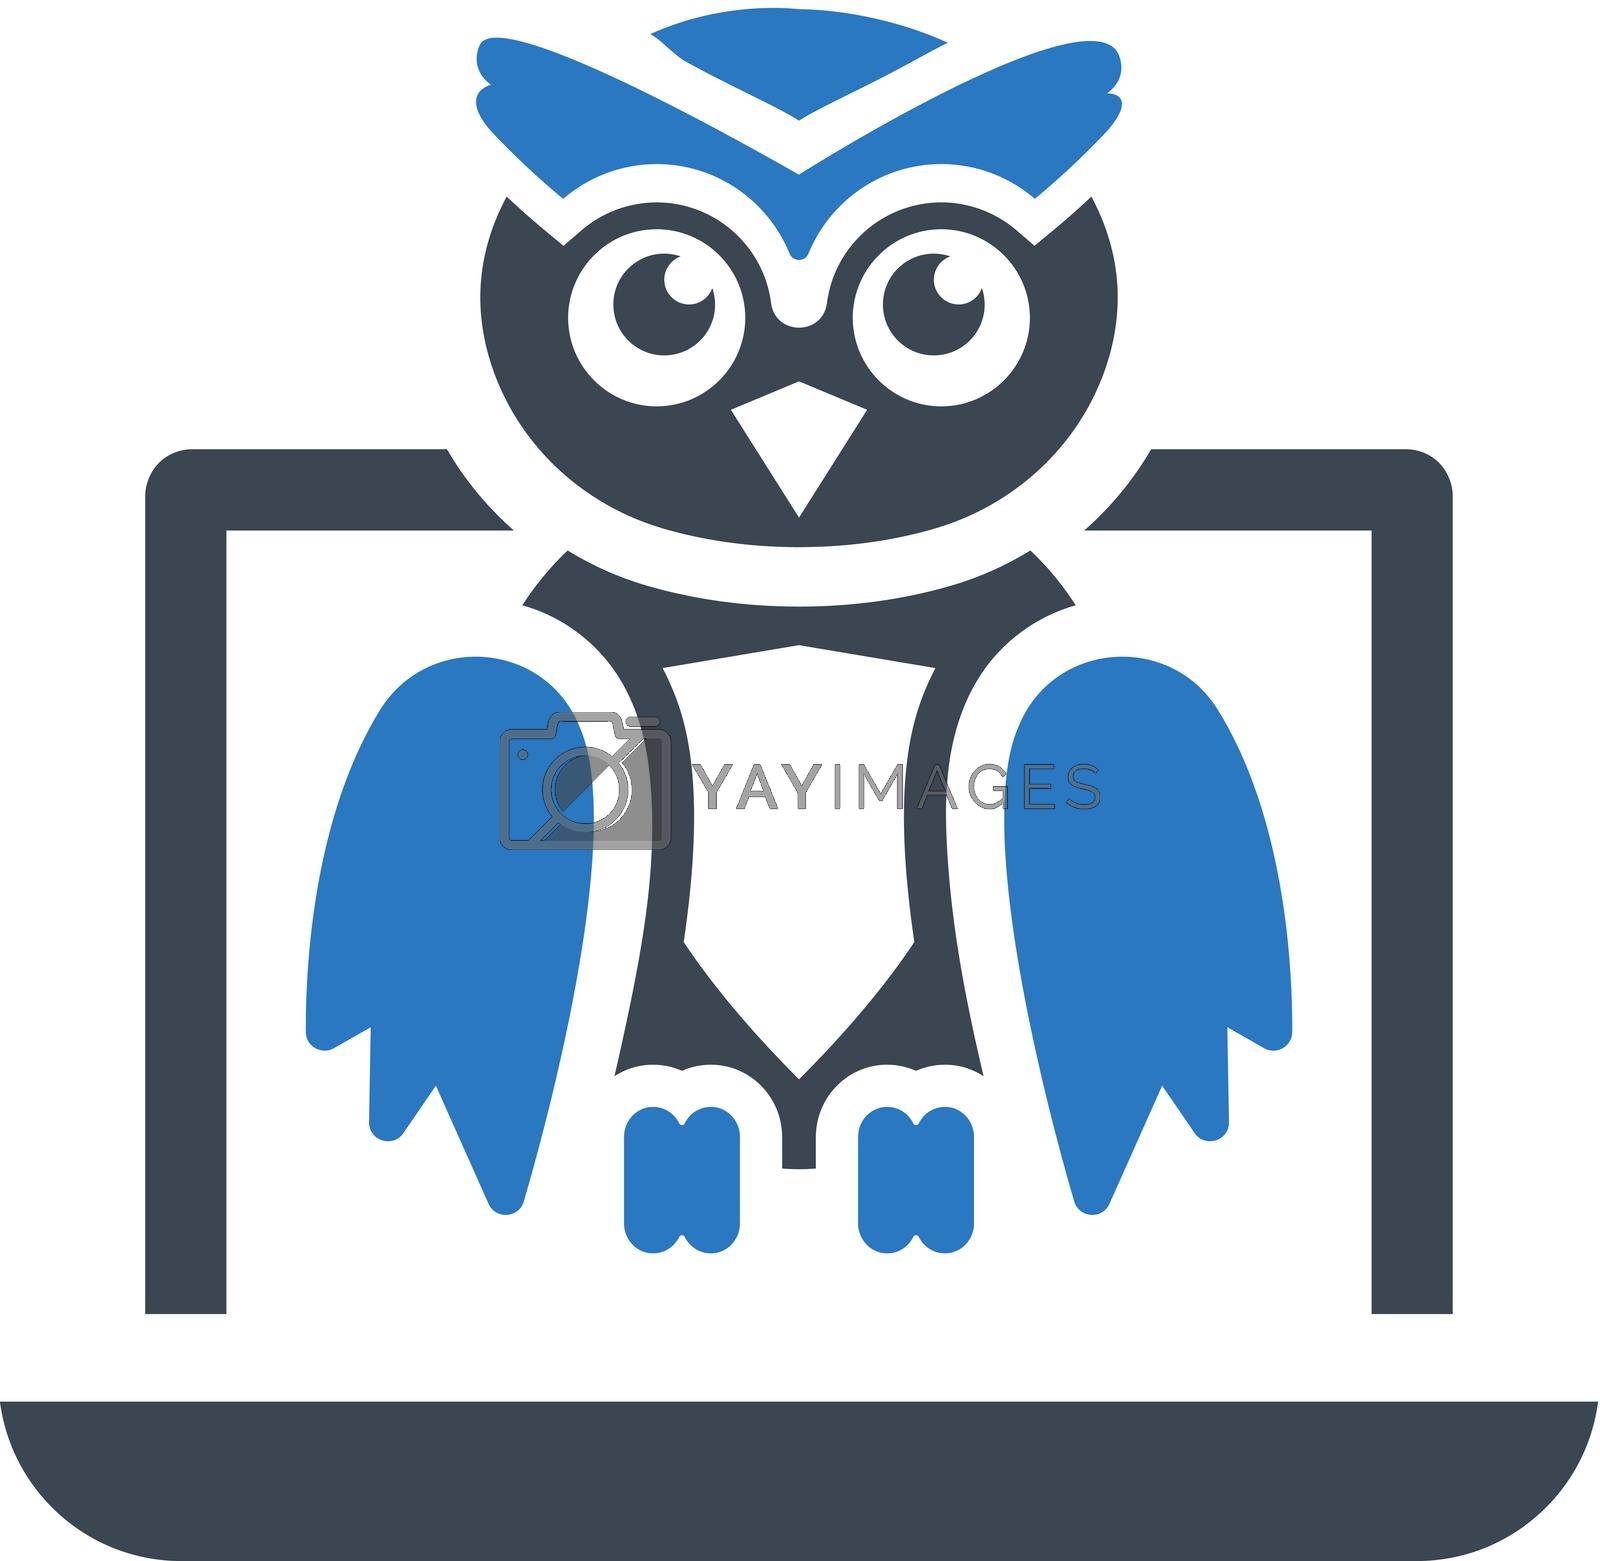 Online education icon. Vector EPS file.